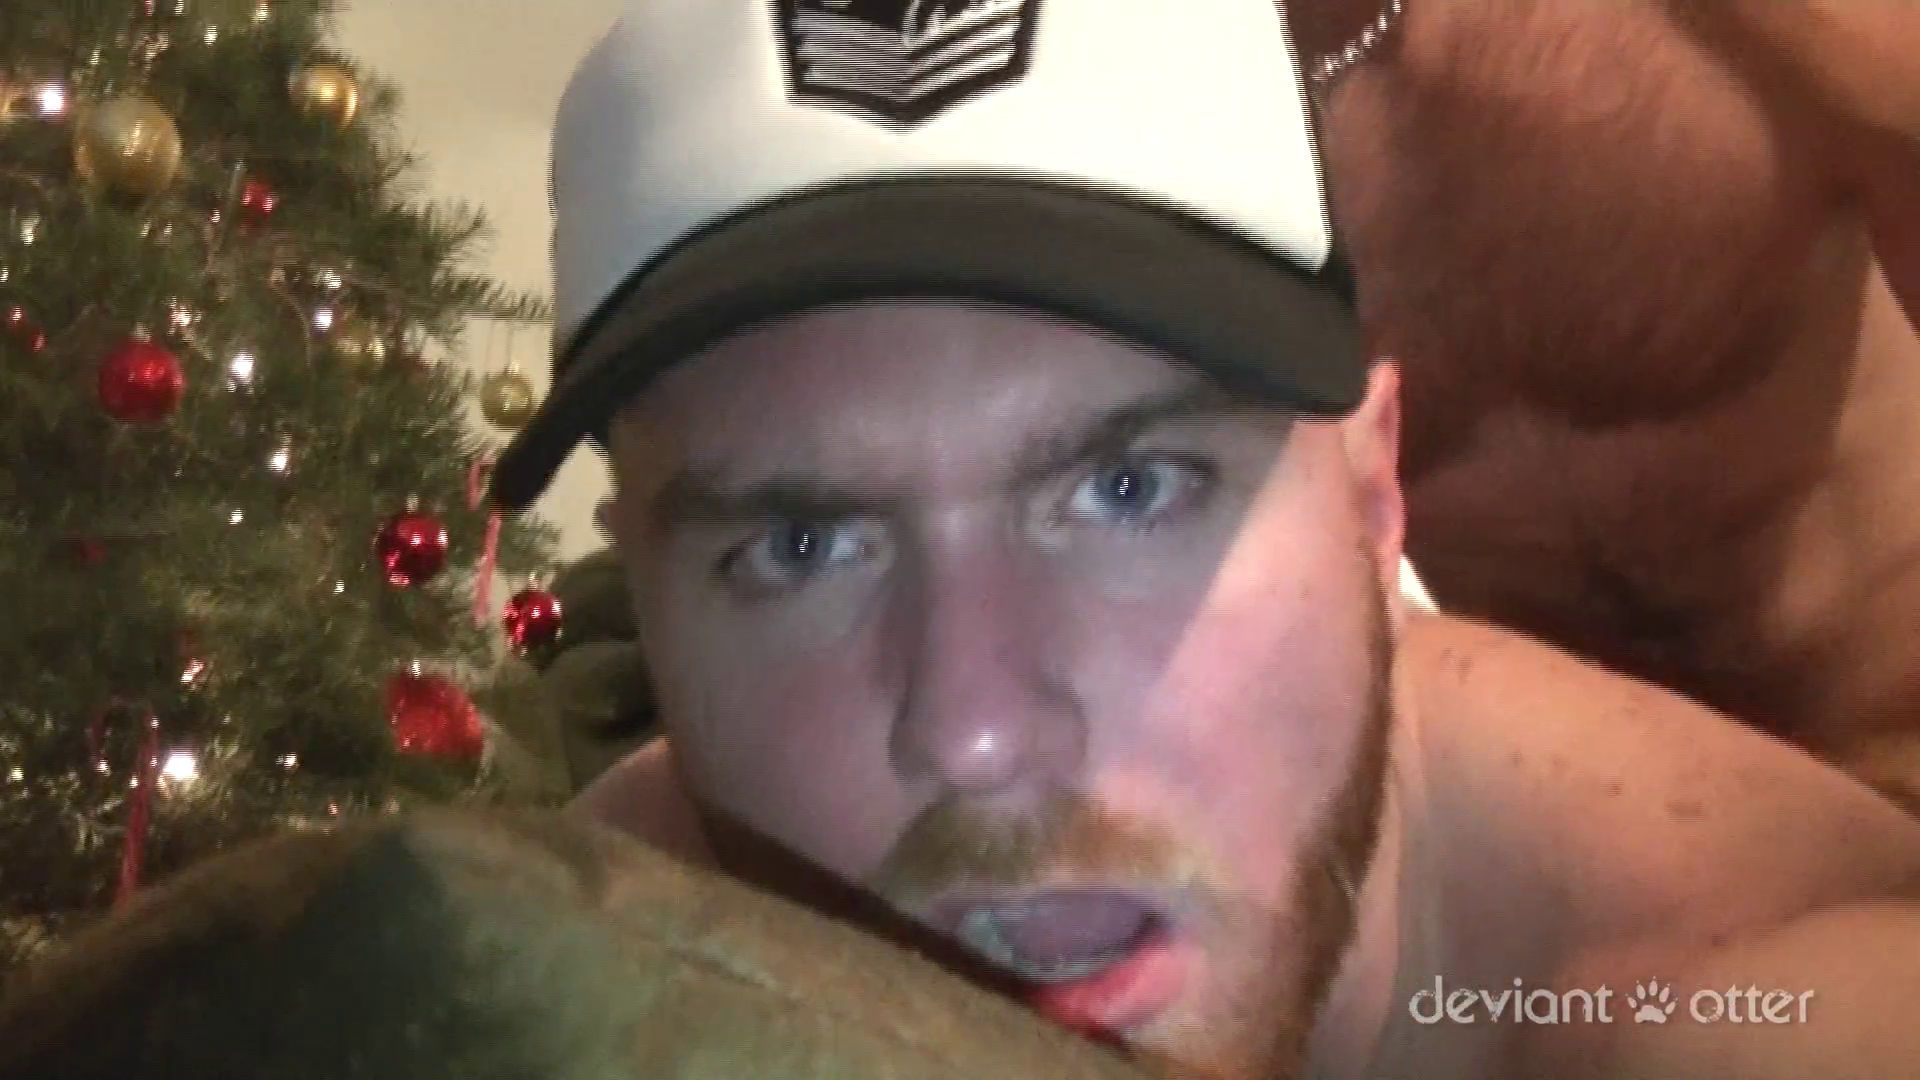 Devin Totter fucks Jameson and double penetrates his hairy hole with a candy cane in the Christmas special for gay porn site Deviant Otter.